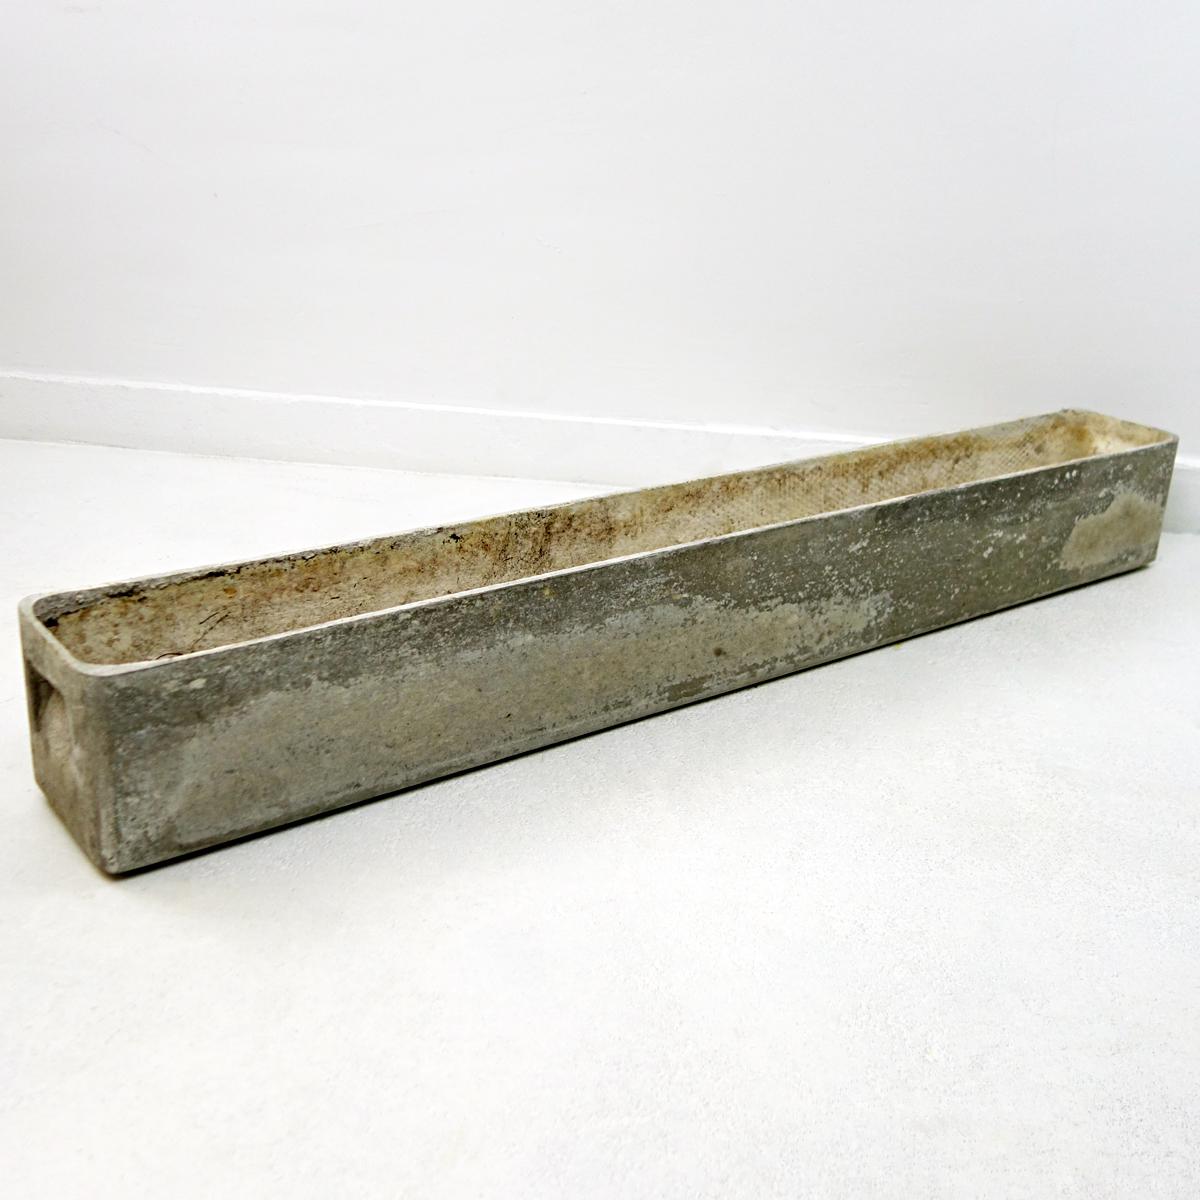 With its length of 120 cm / 47.2 inches this is a particularly long planter. A very rare size in the Willy Guhl range.

 